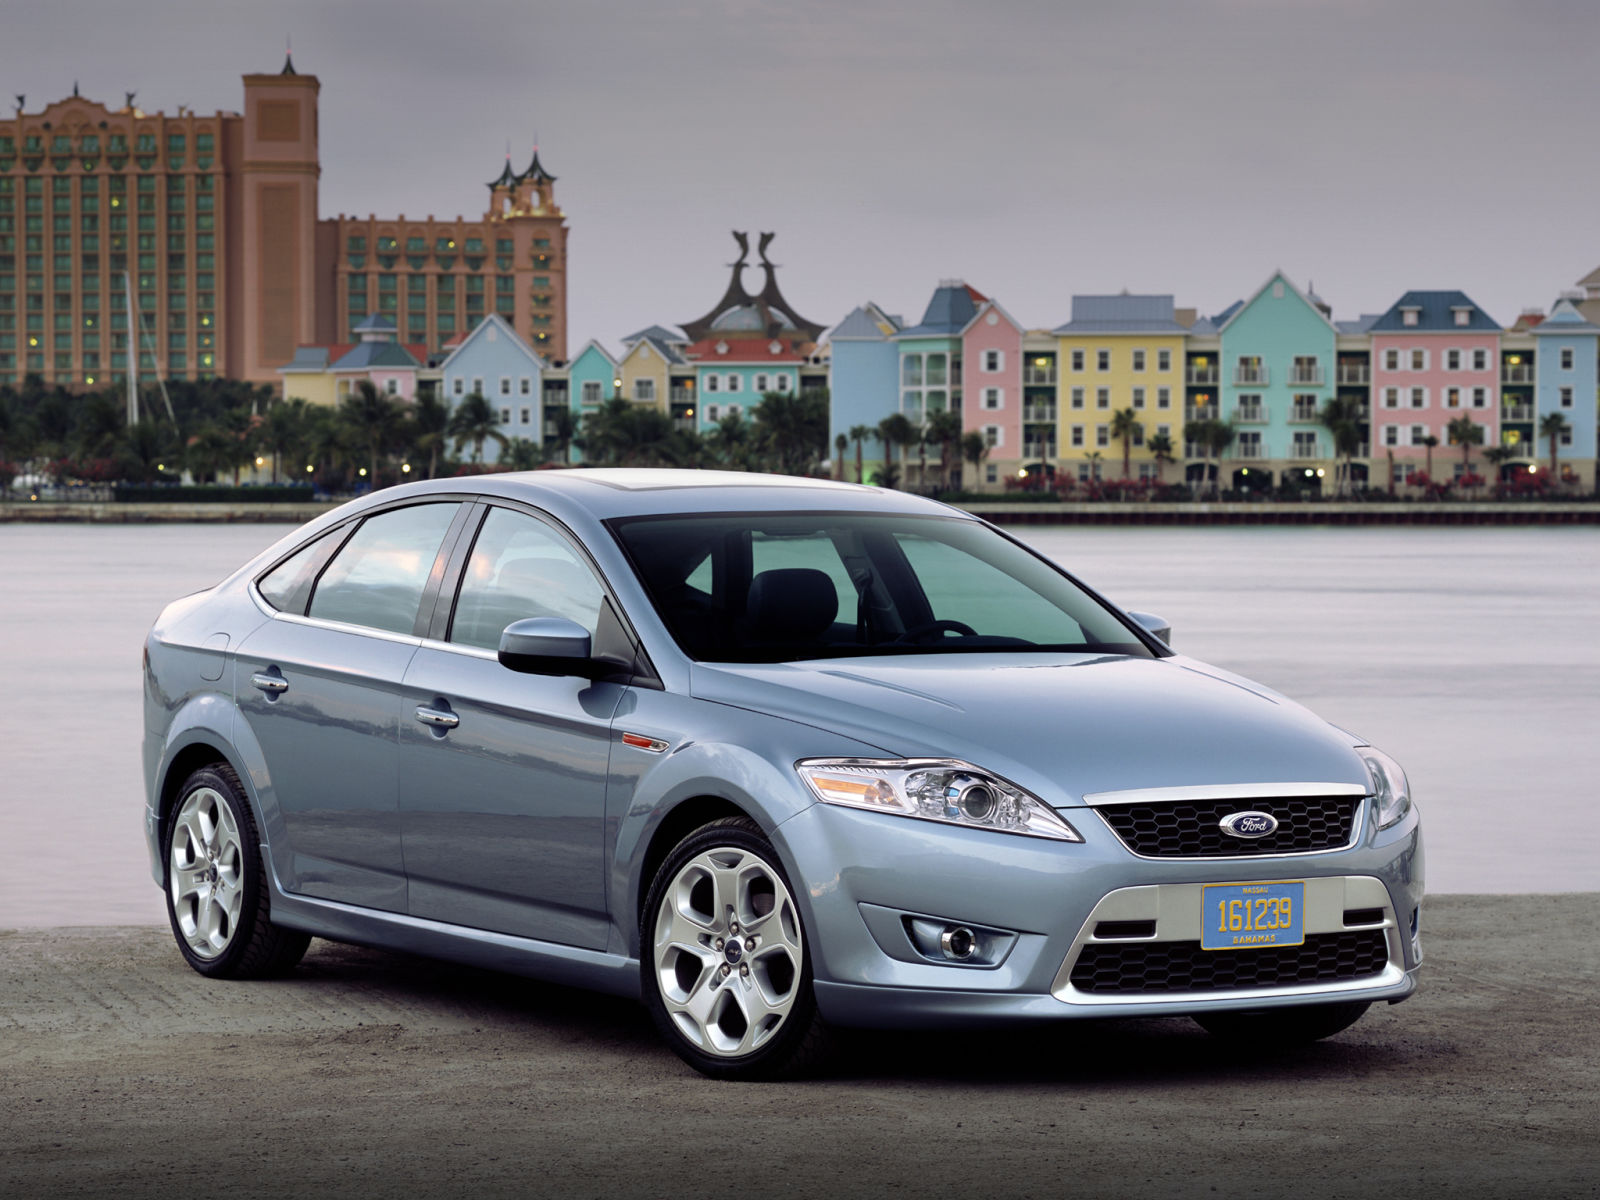 Bond’s rental in Casino Royale was apparently badged as an ST model, seeing as it shares the Focus ST’s engine. Was renamed as the Ford Mondeo 2.5T Titanium Sport for production. Also known as the Mondeo 2.5T Titanium X Sport in the British Isles, and the Mondeo XR5 Turbo in Australasia.